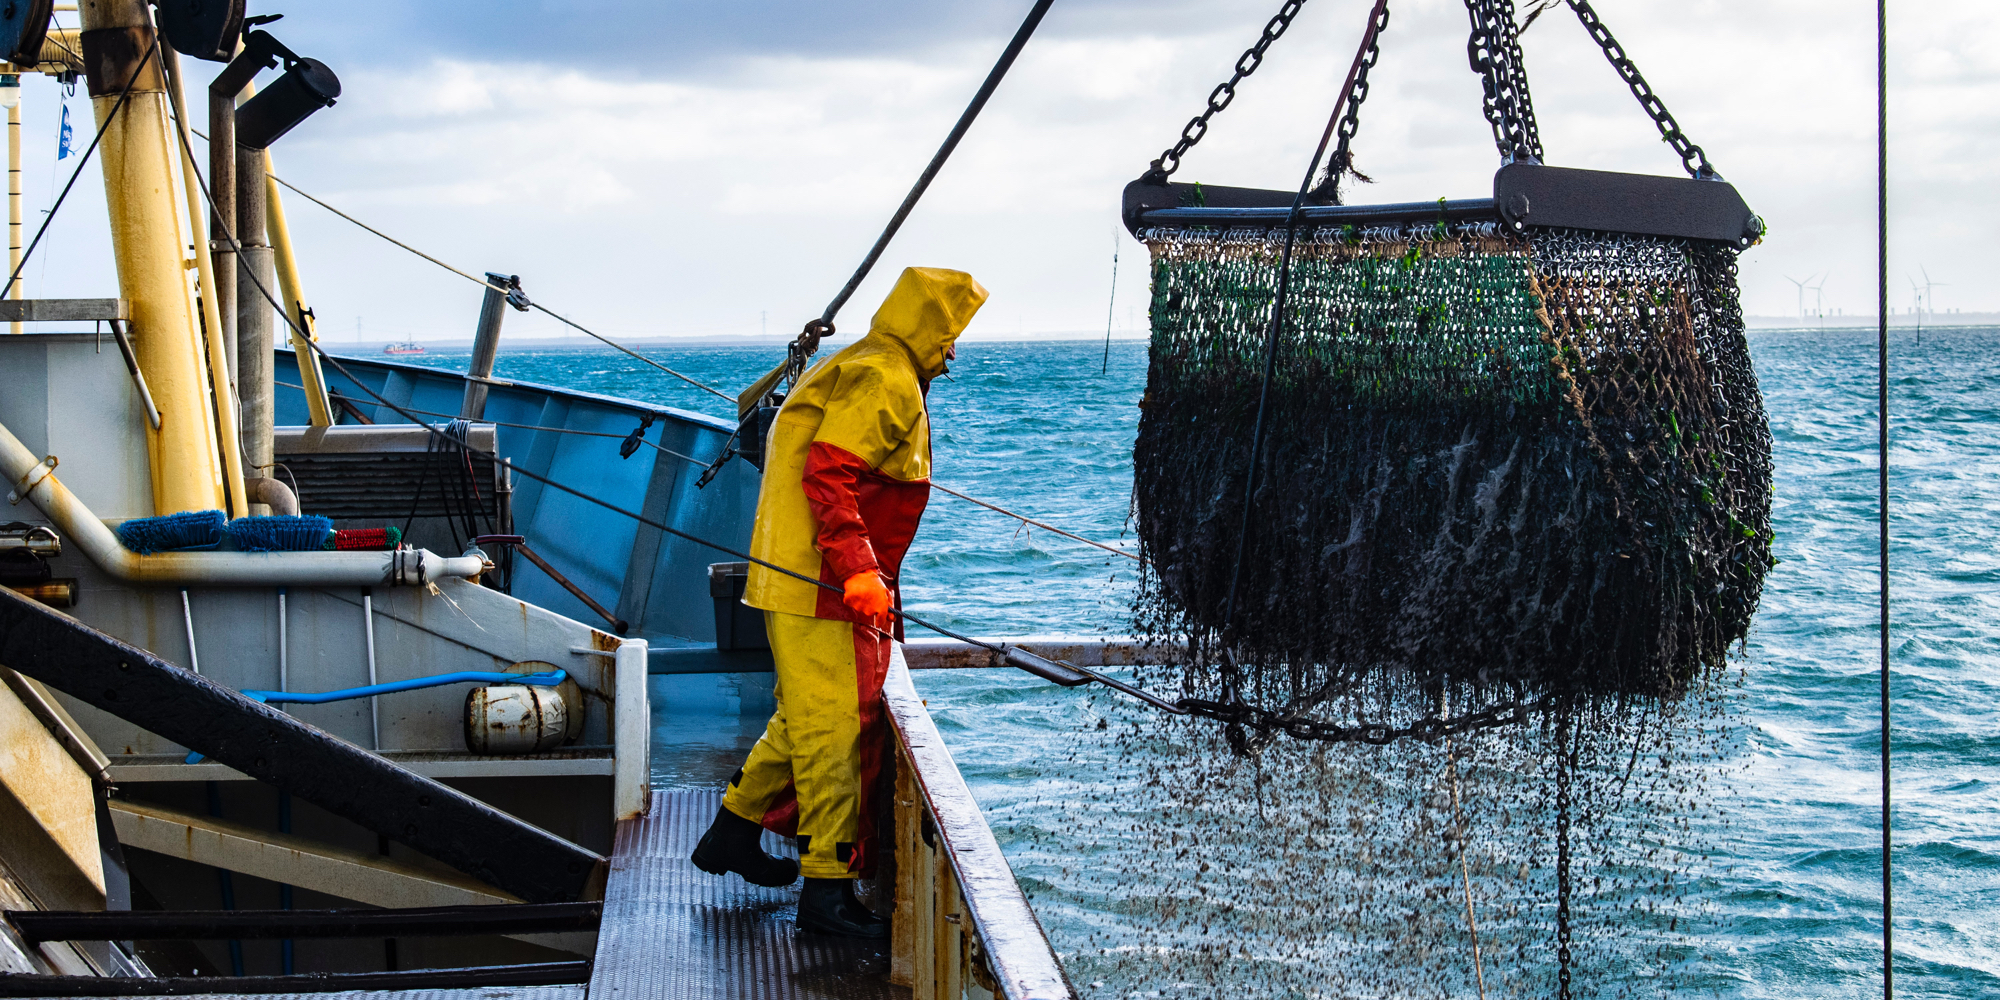 the government funding will give recognition to the fishing industry